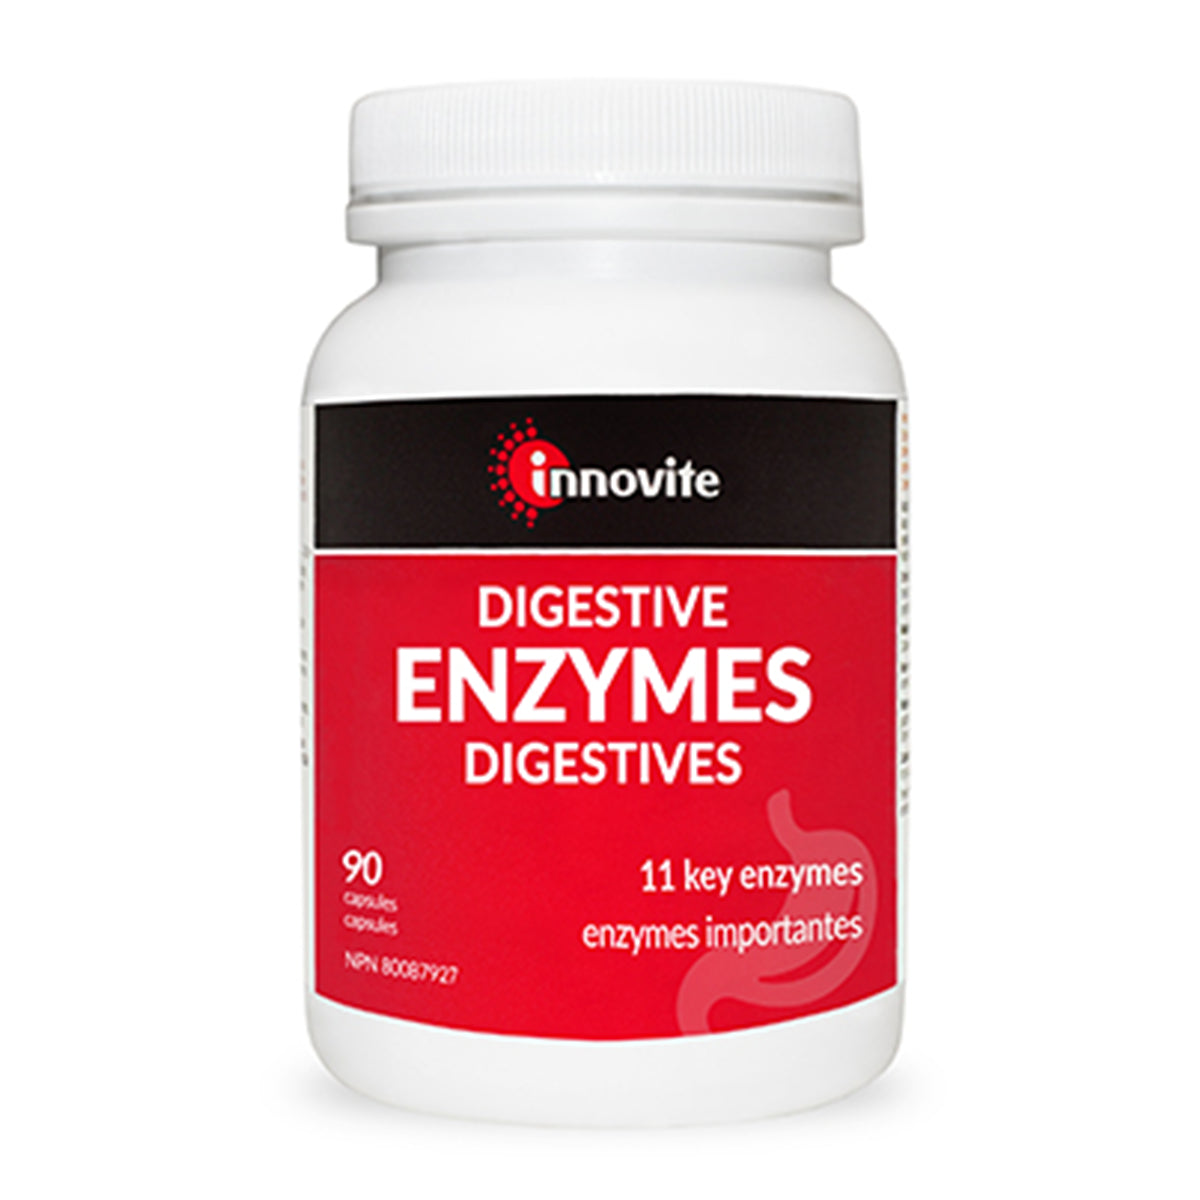 Innovite Digestive Enzymes (90 caps)